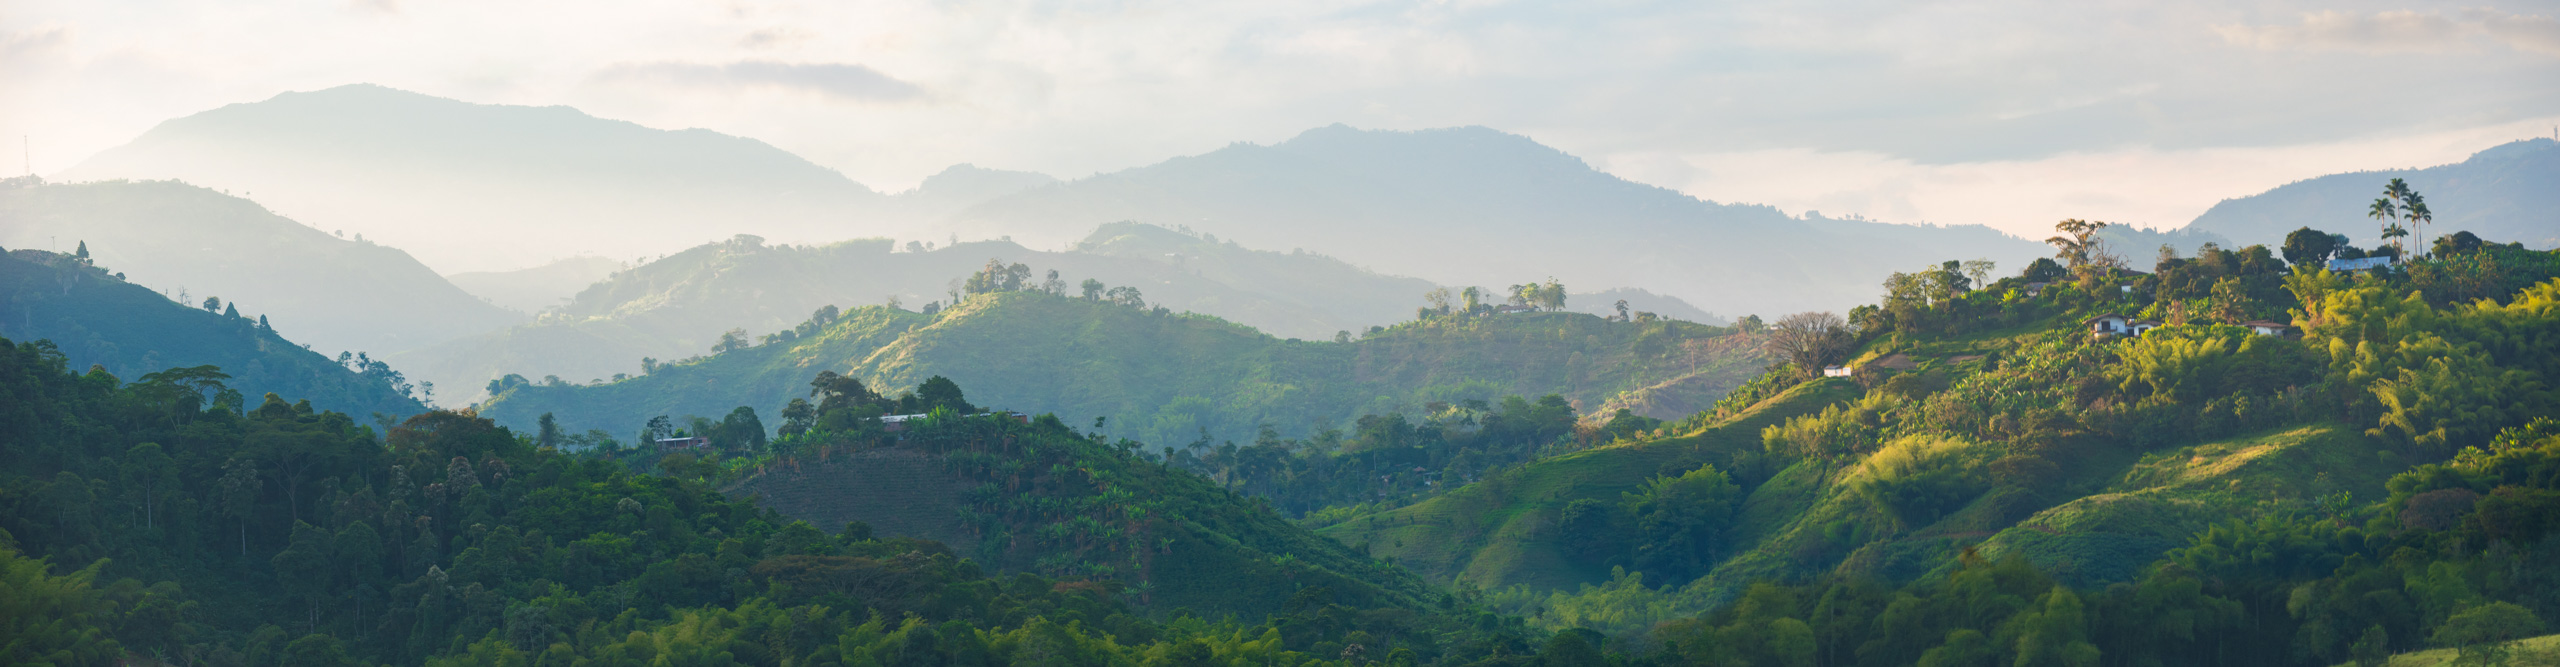 Misty skies at sunset over the green rollings hill of a coffee plantation in Colombia 